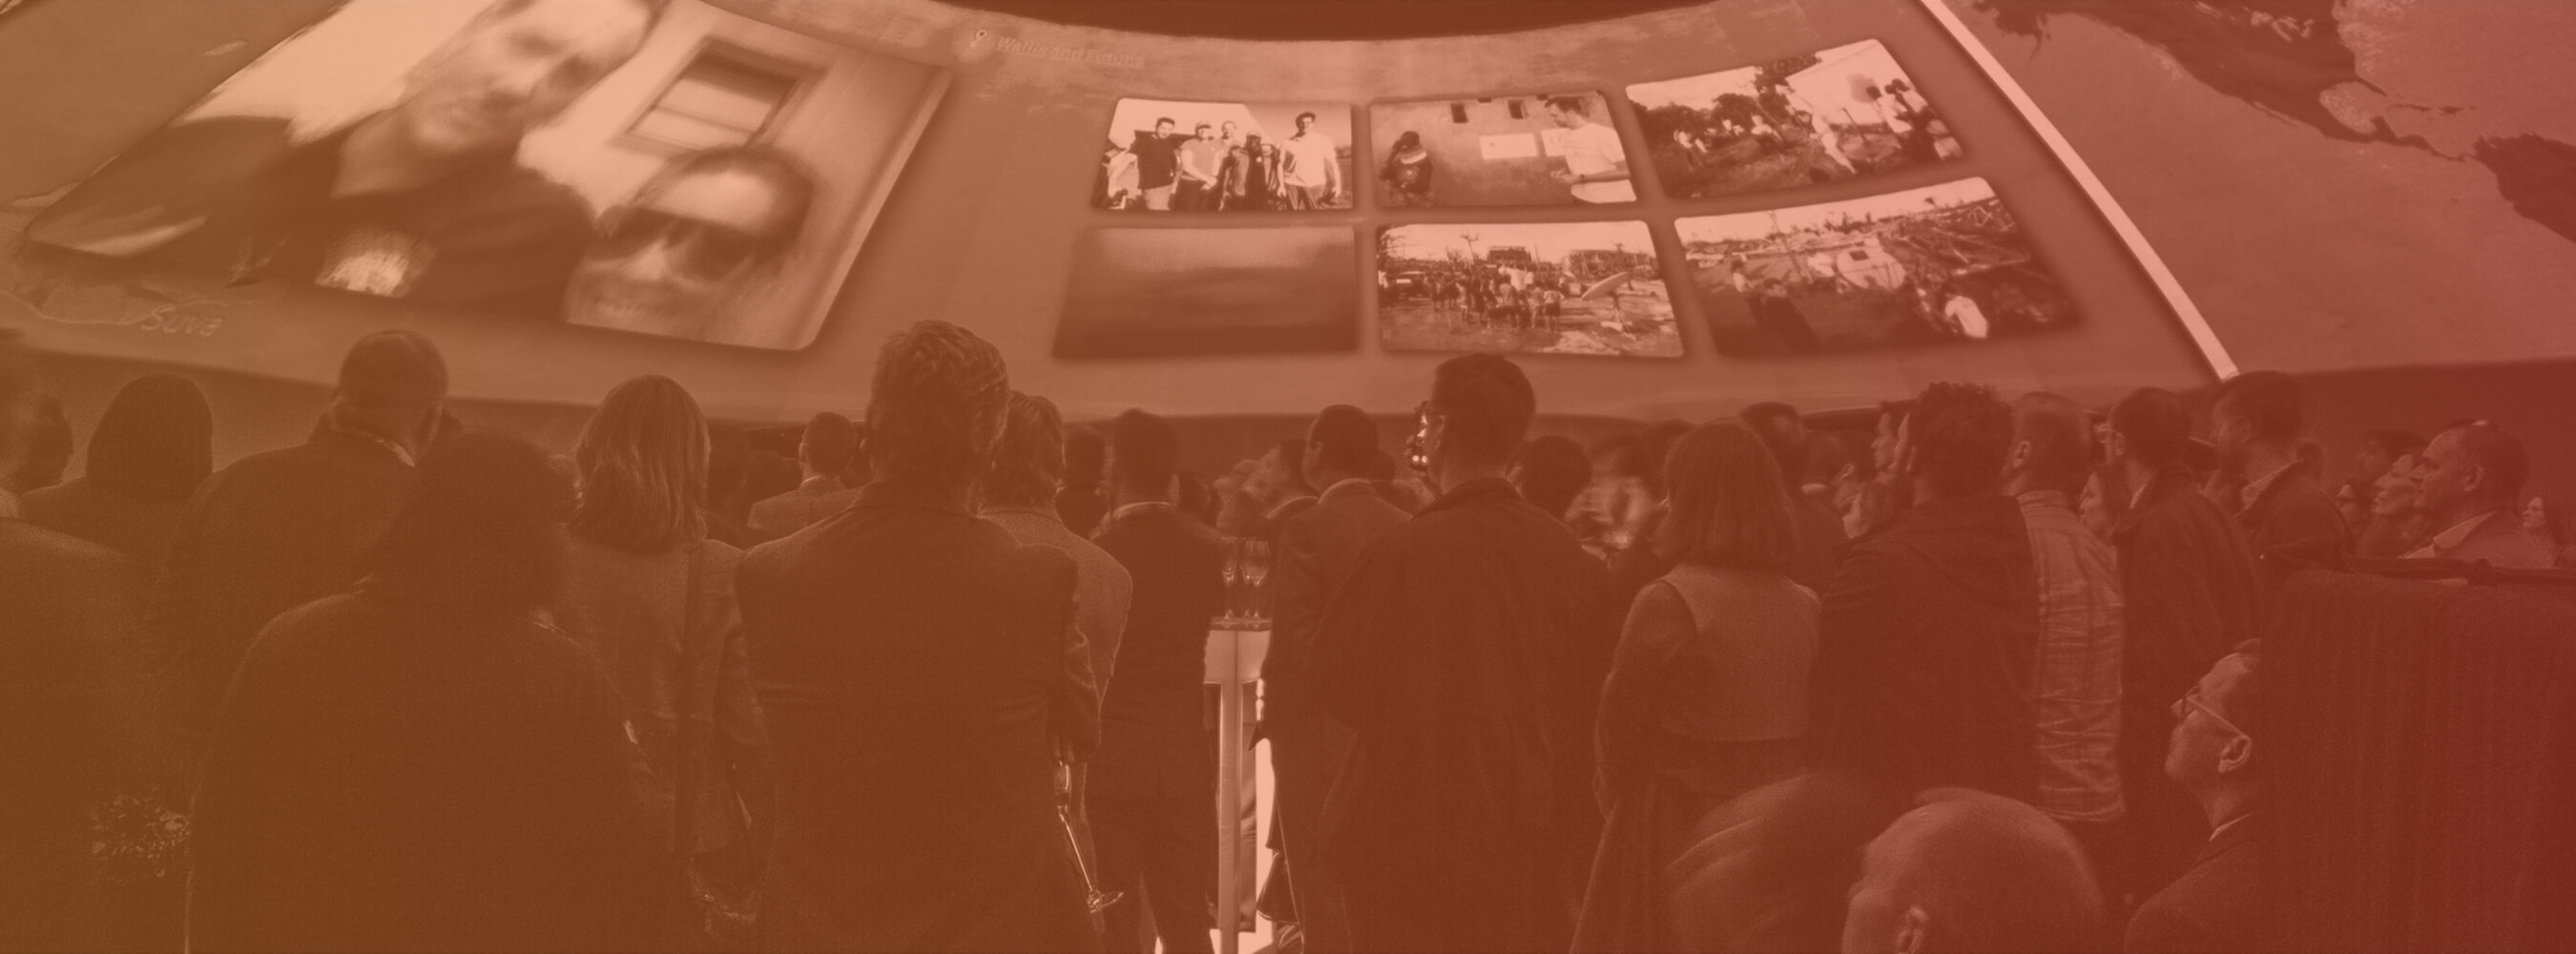 An Immersive Dome Experience for Vodafone Foundation